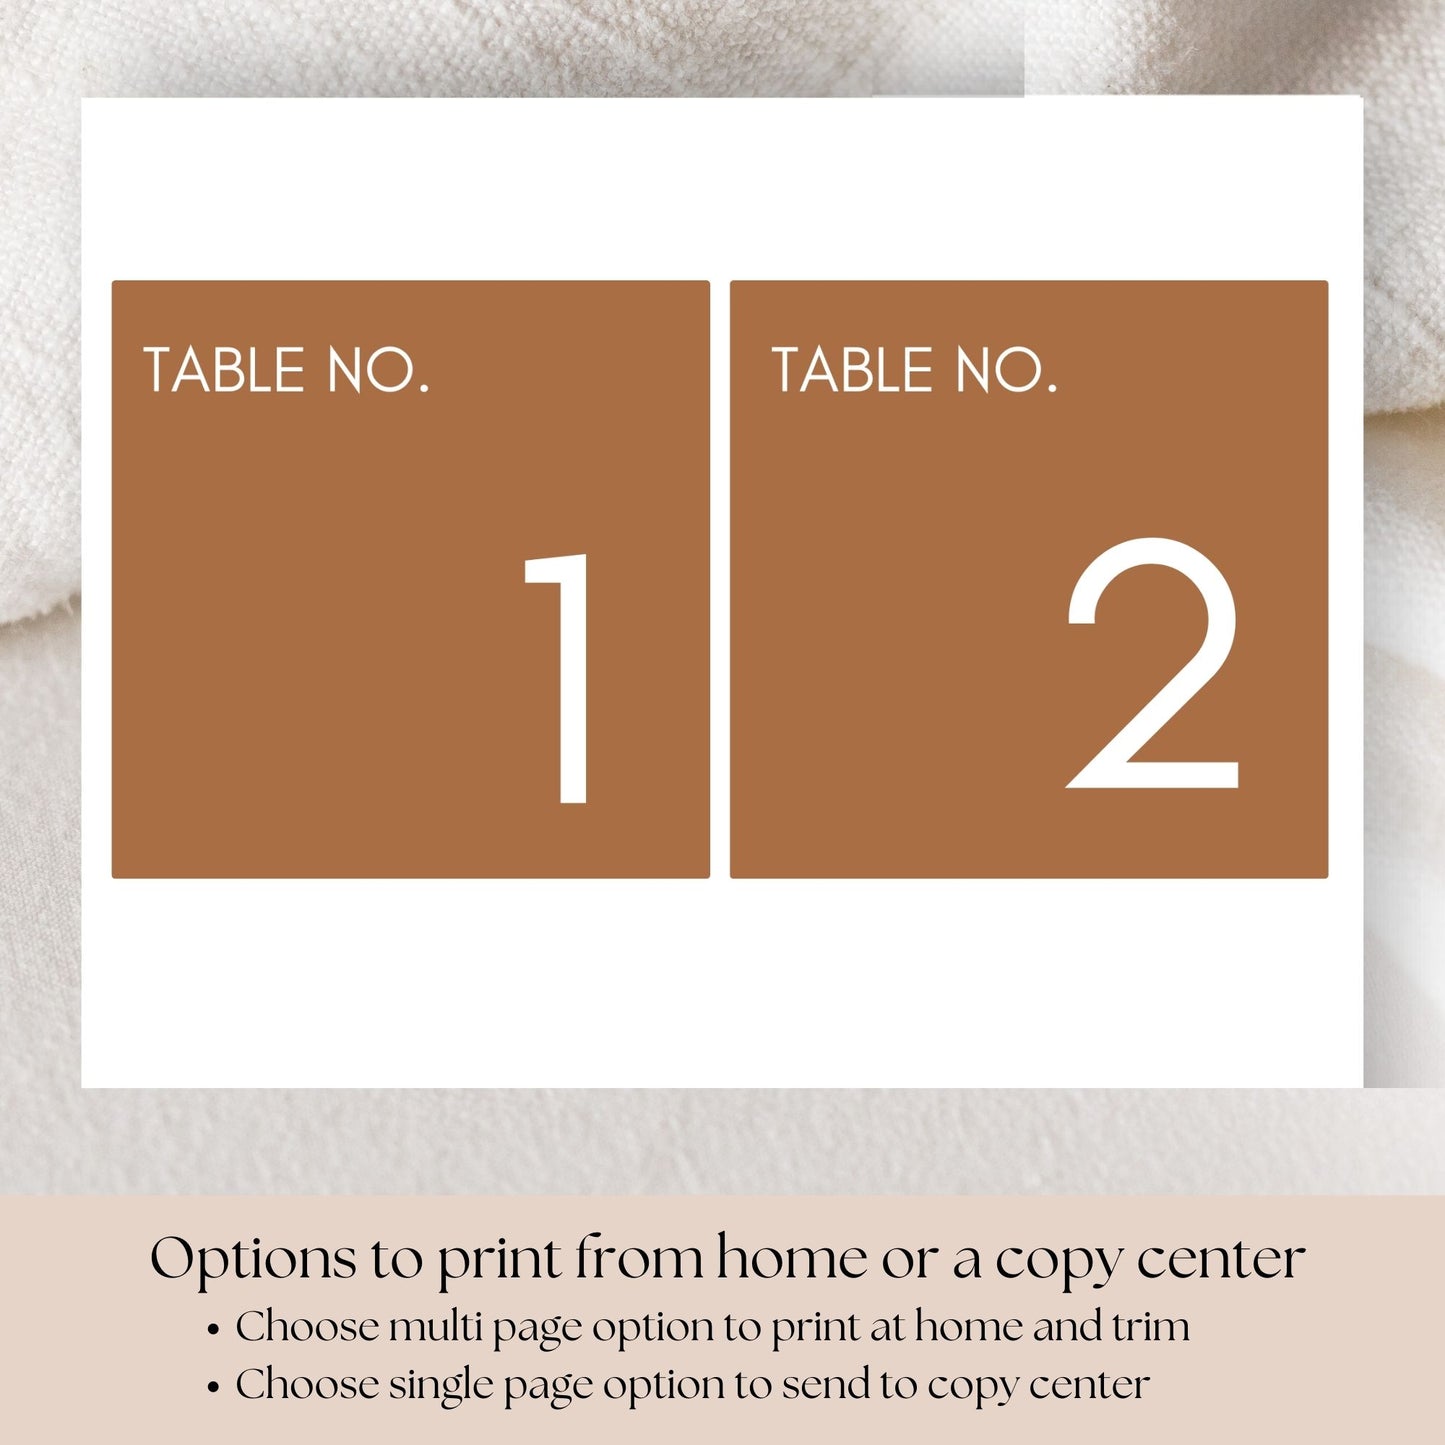 Terracotta Rust Minimalist Square Table Numbers Template | 5x5 Table Numbers Printable | Modern Square Wedding Table Numbers | Download in Canva